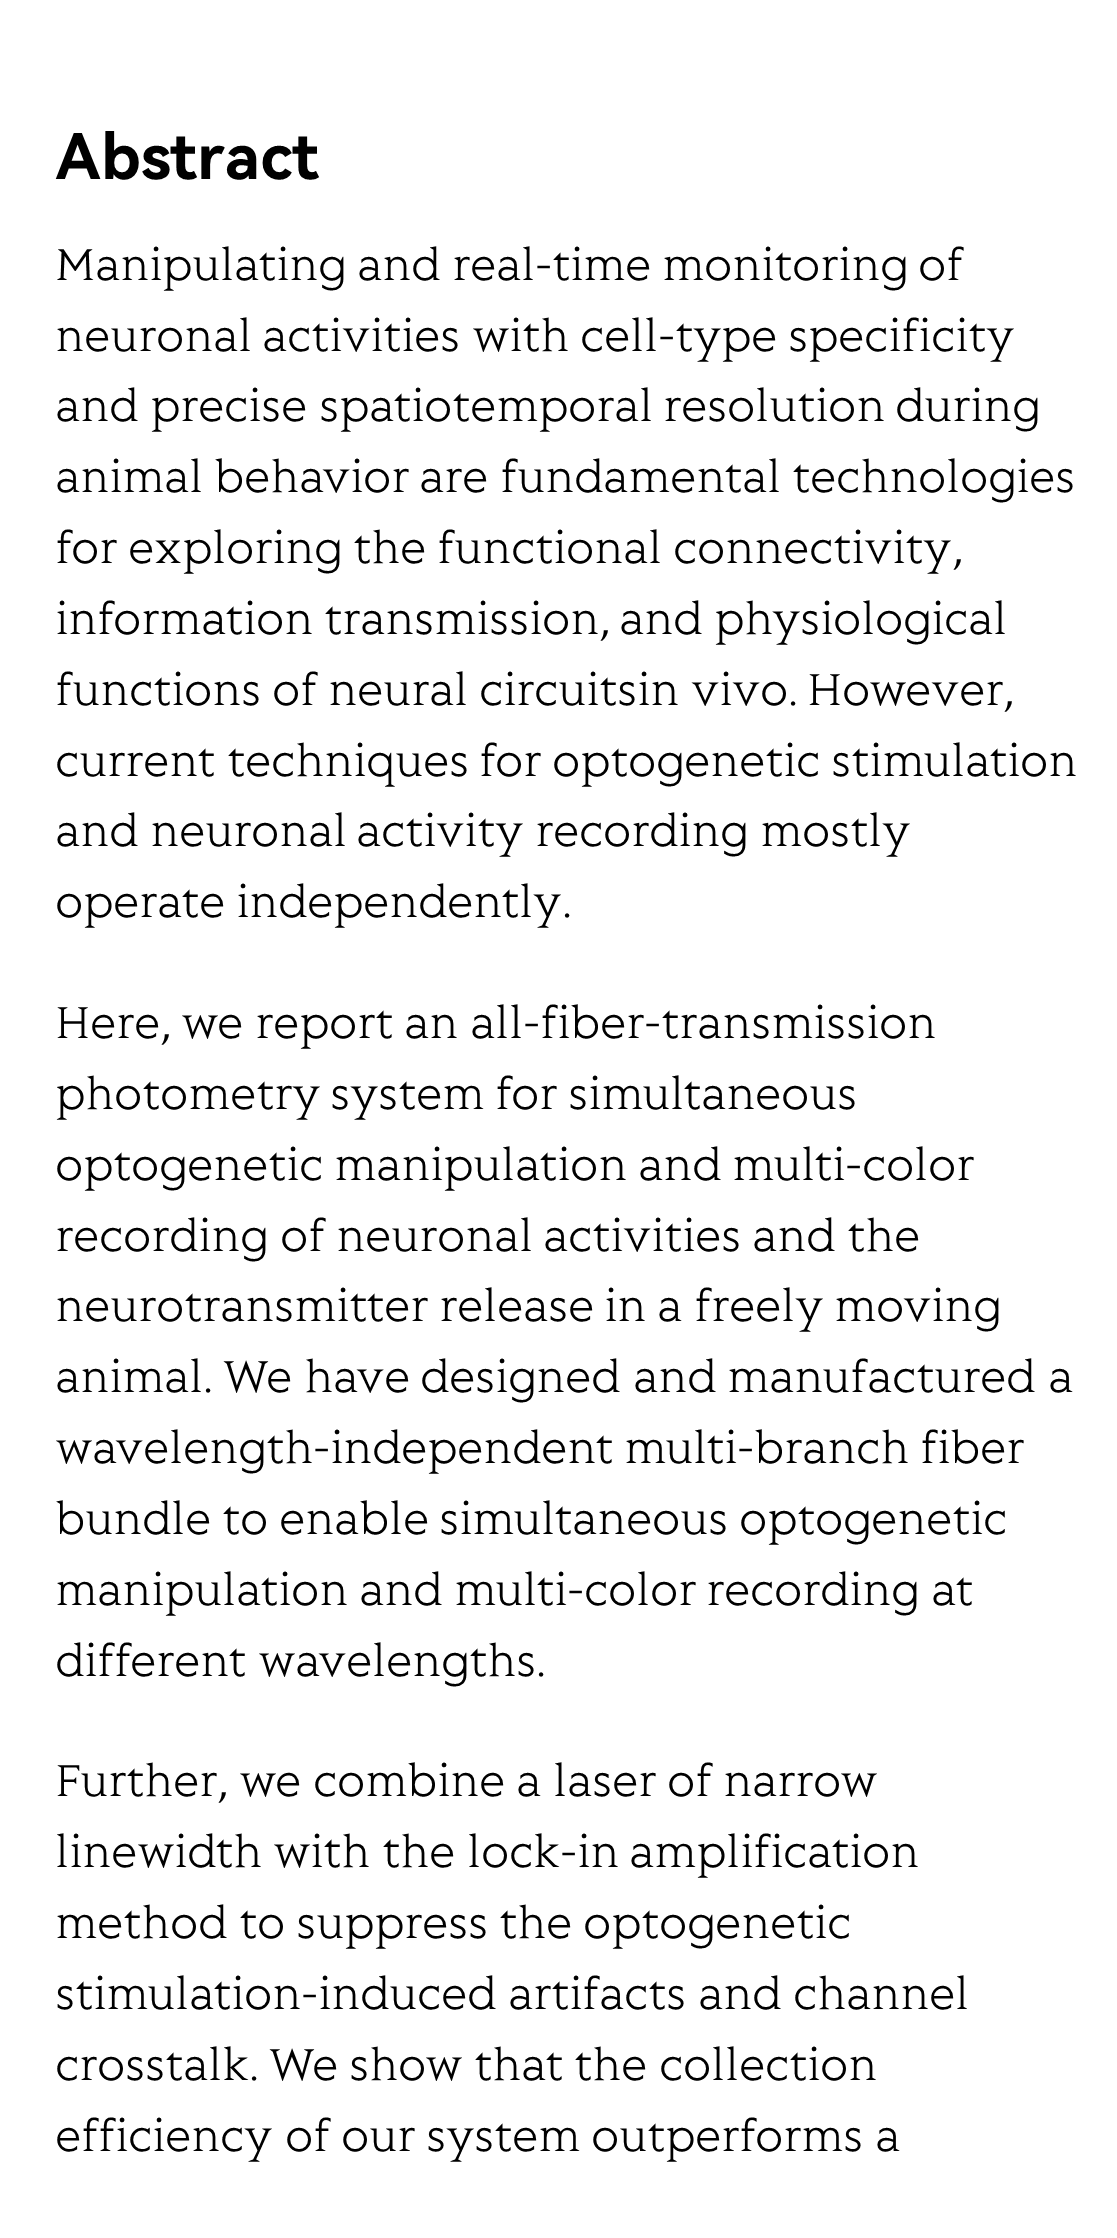 All-fiber-transmission photometry for simultaneous optogenetic stimulation and multi-color neuronal activity recording_2